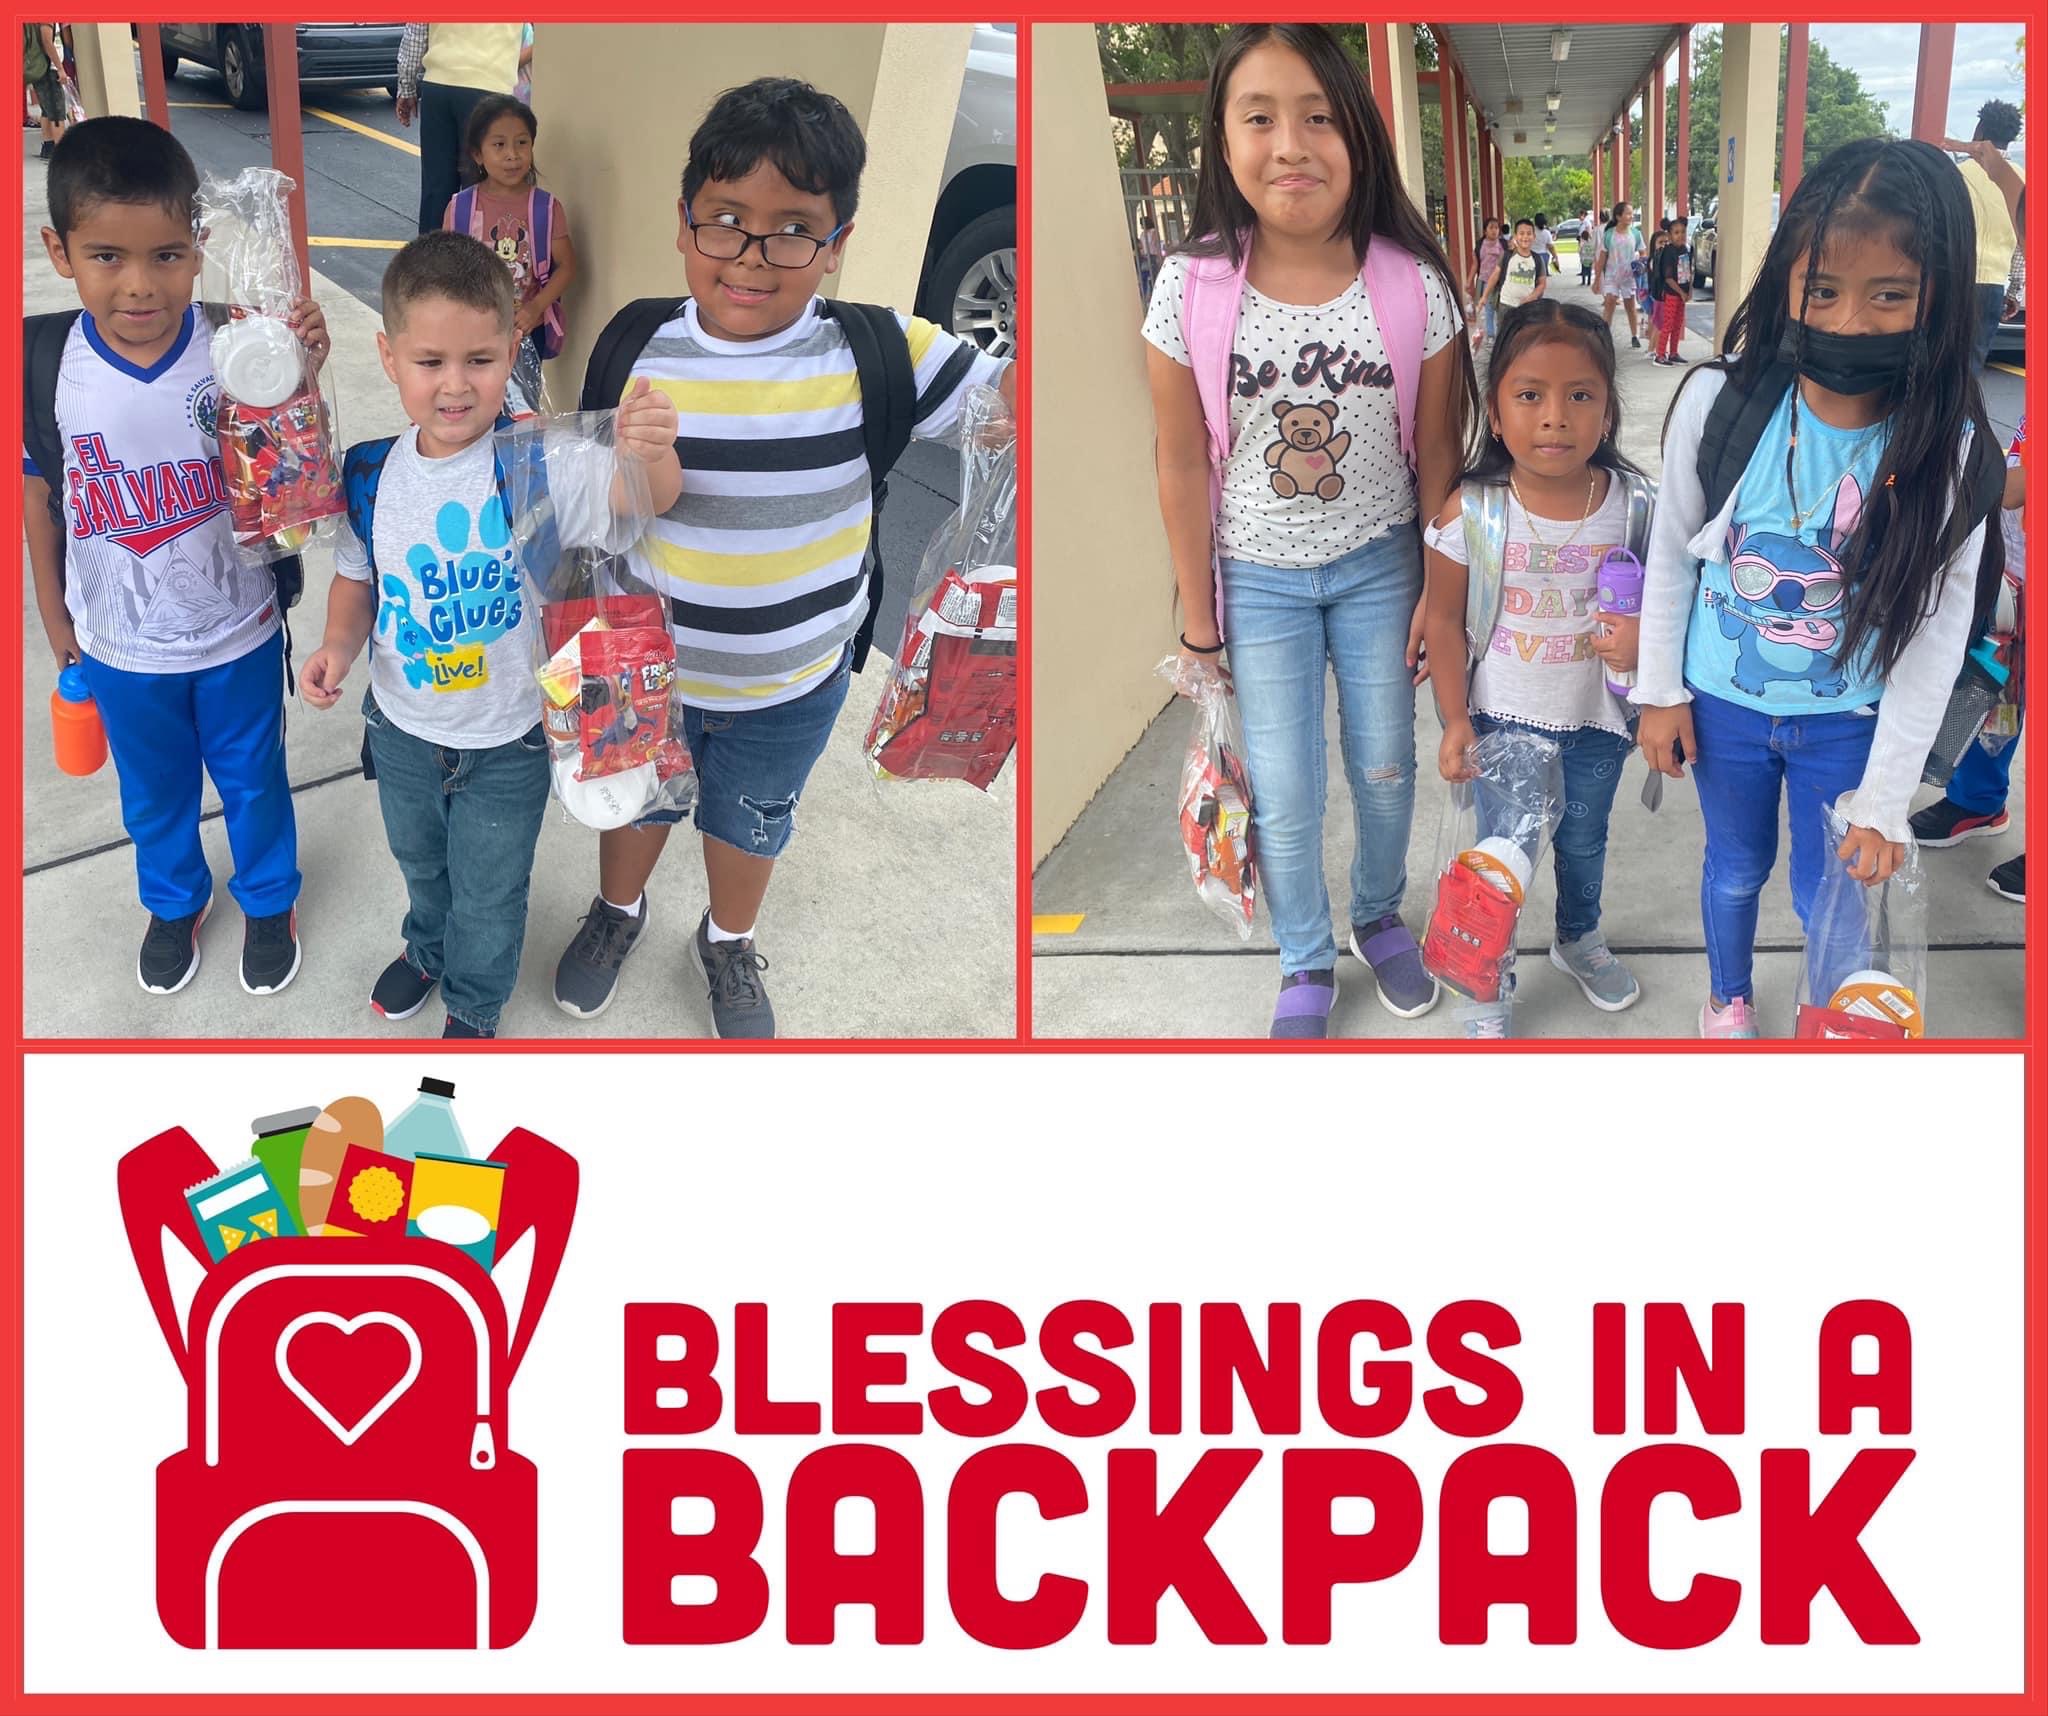 Blessings in a Backpack feeds nearly 10,000 children since Ian